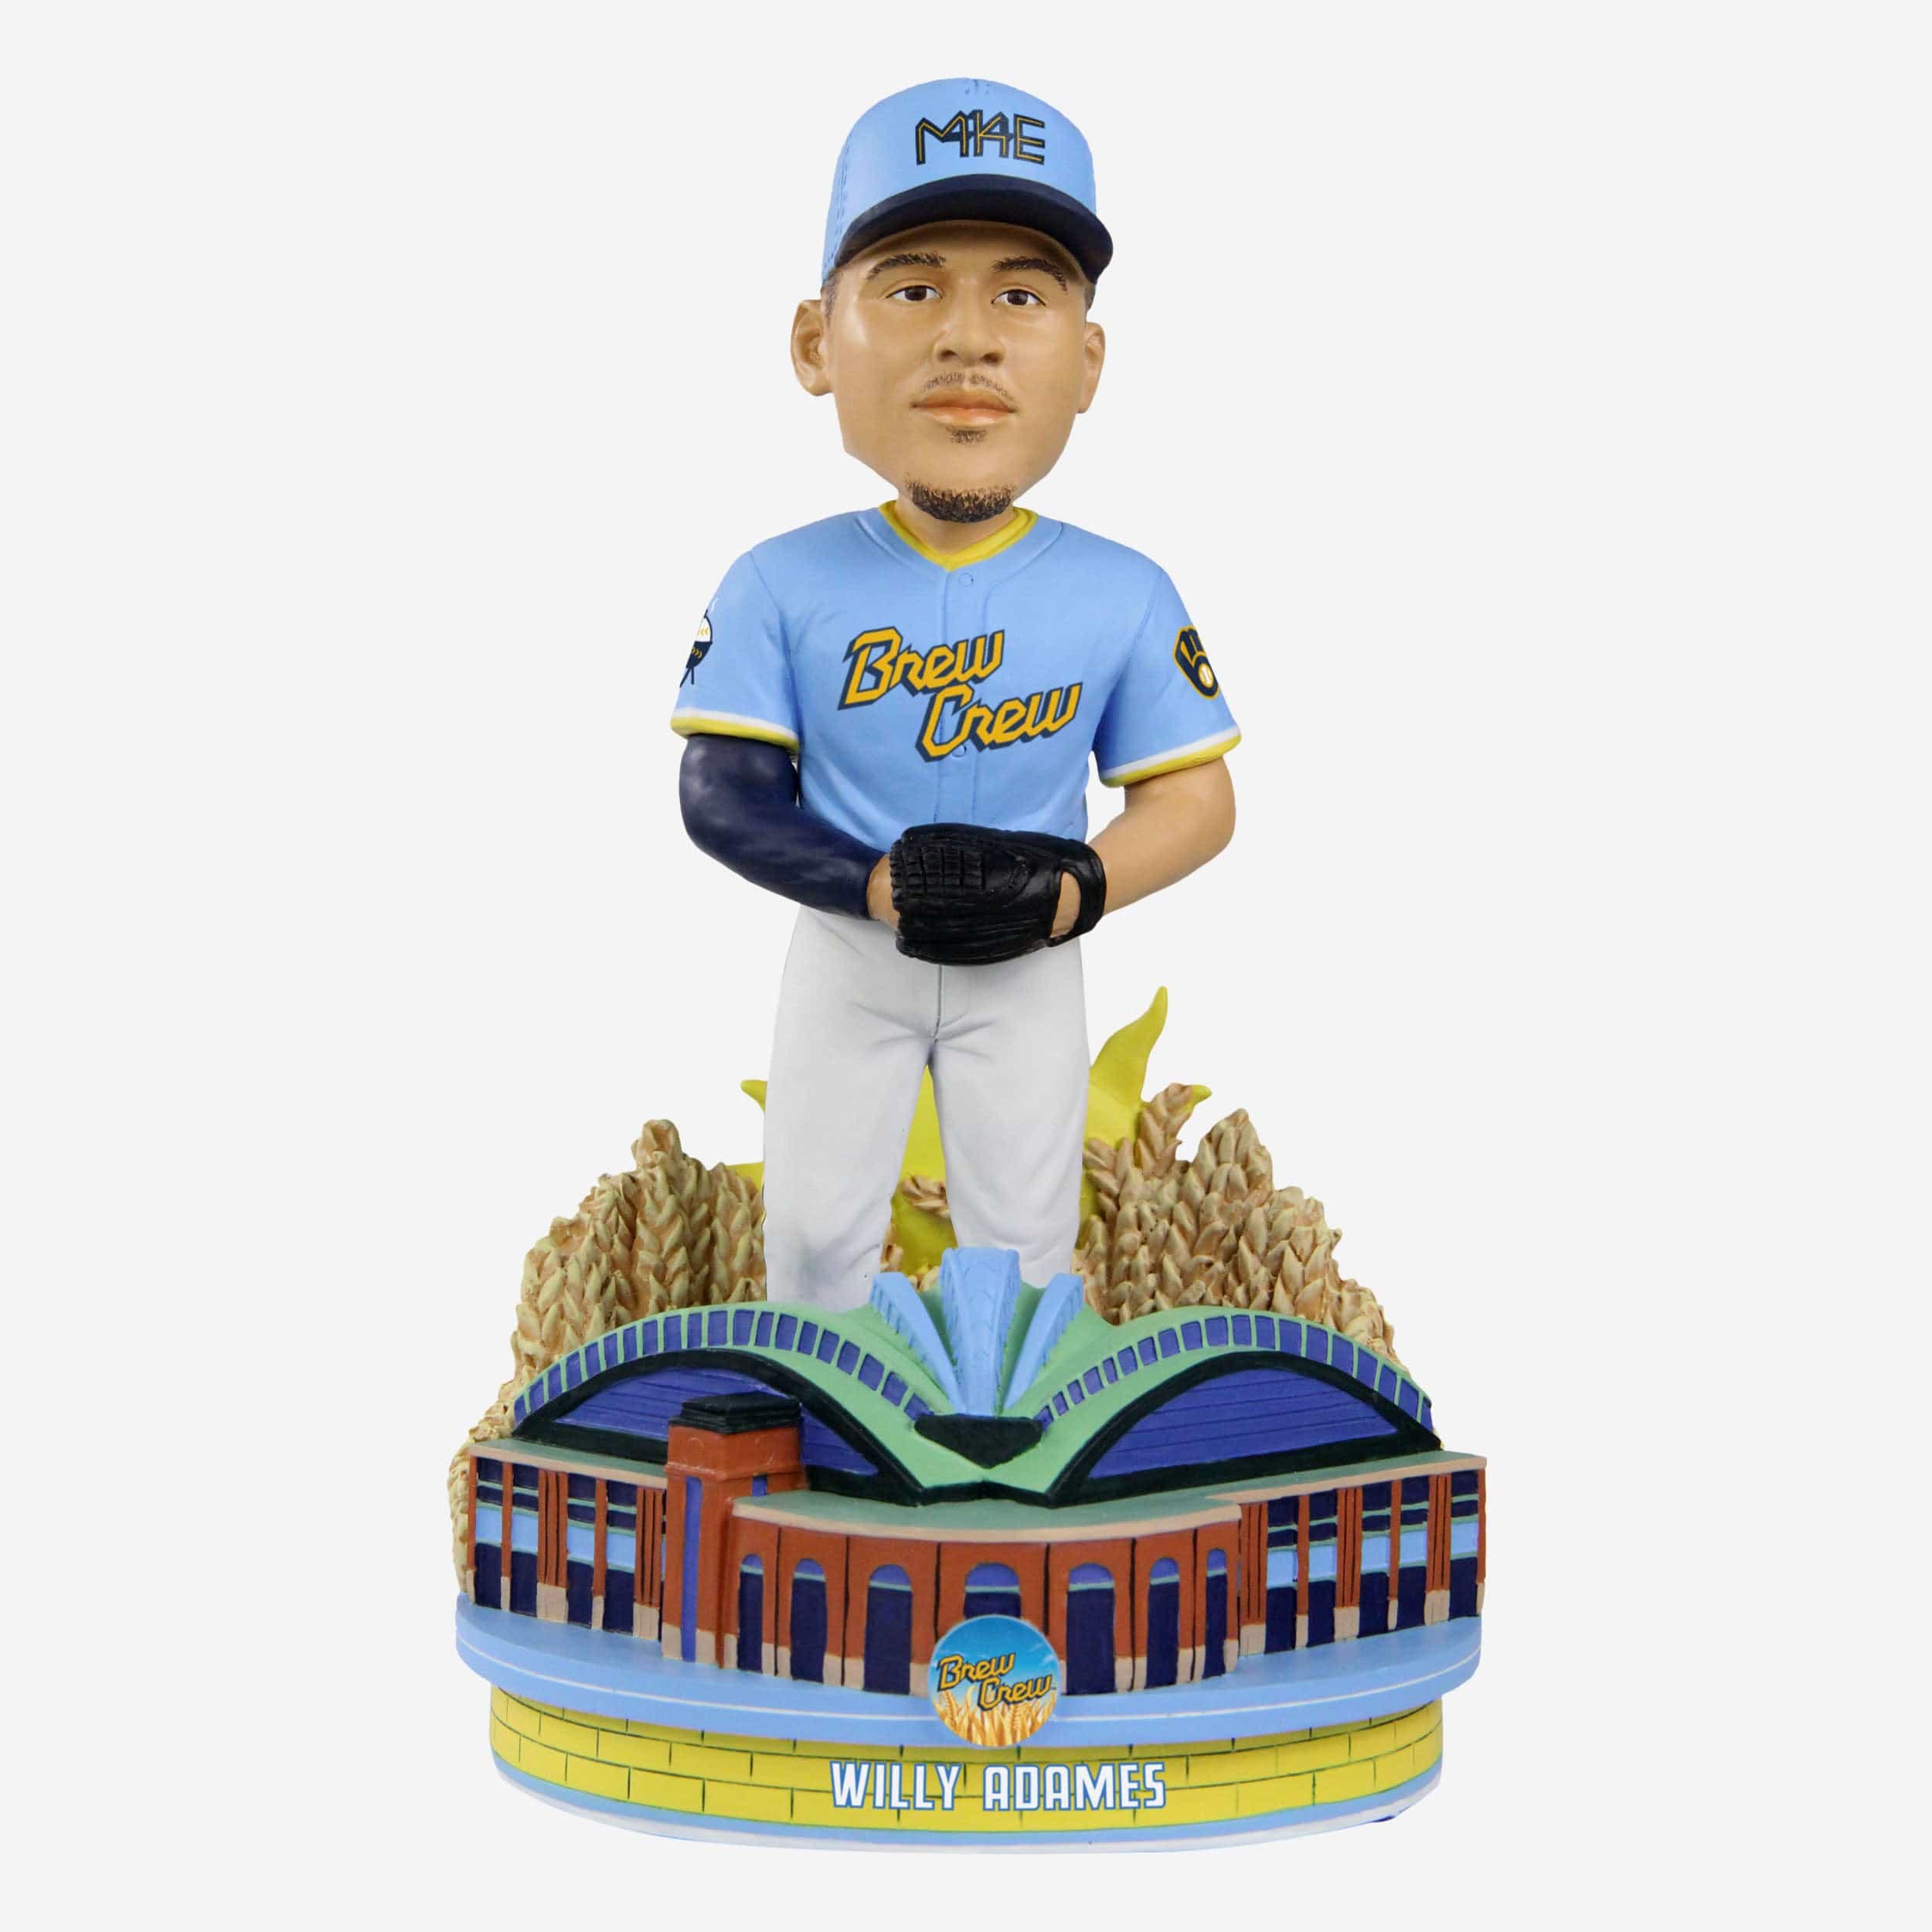 Brewers announce 2022 bobbleheads (minus the actual bobbleheads)